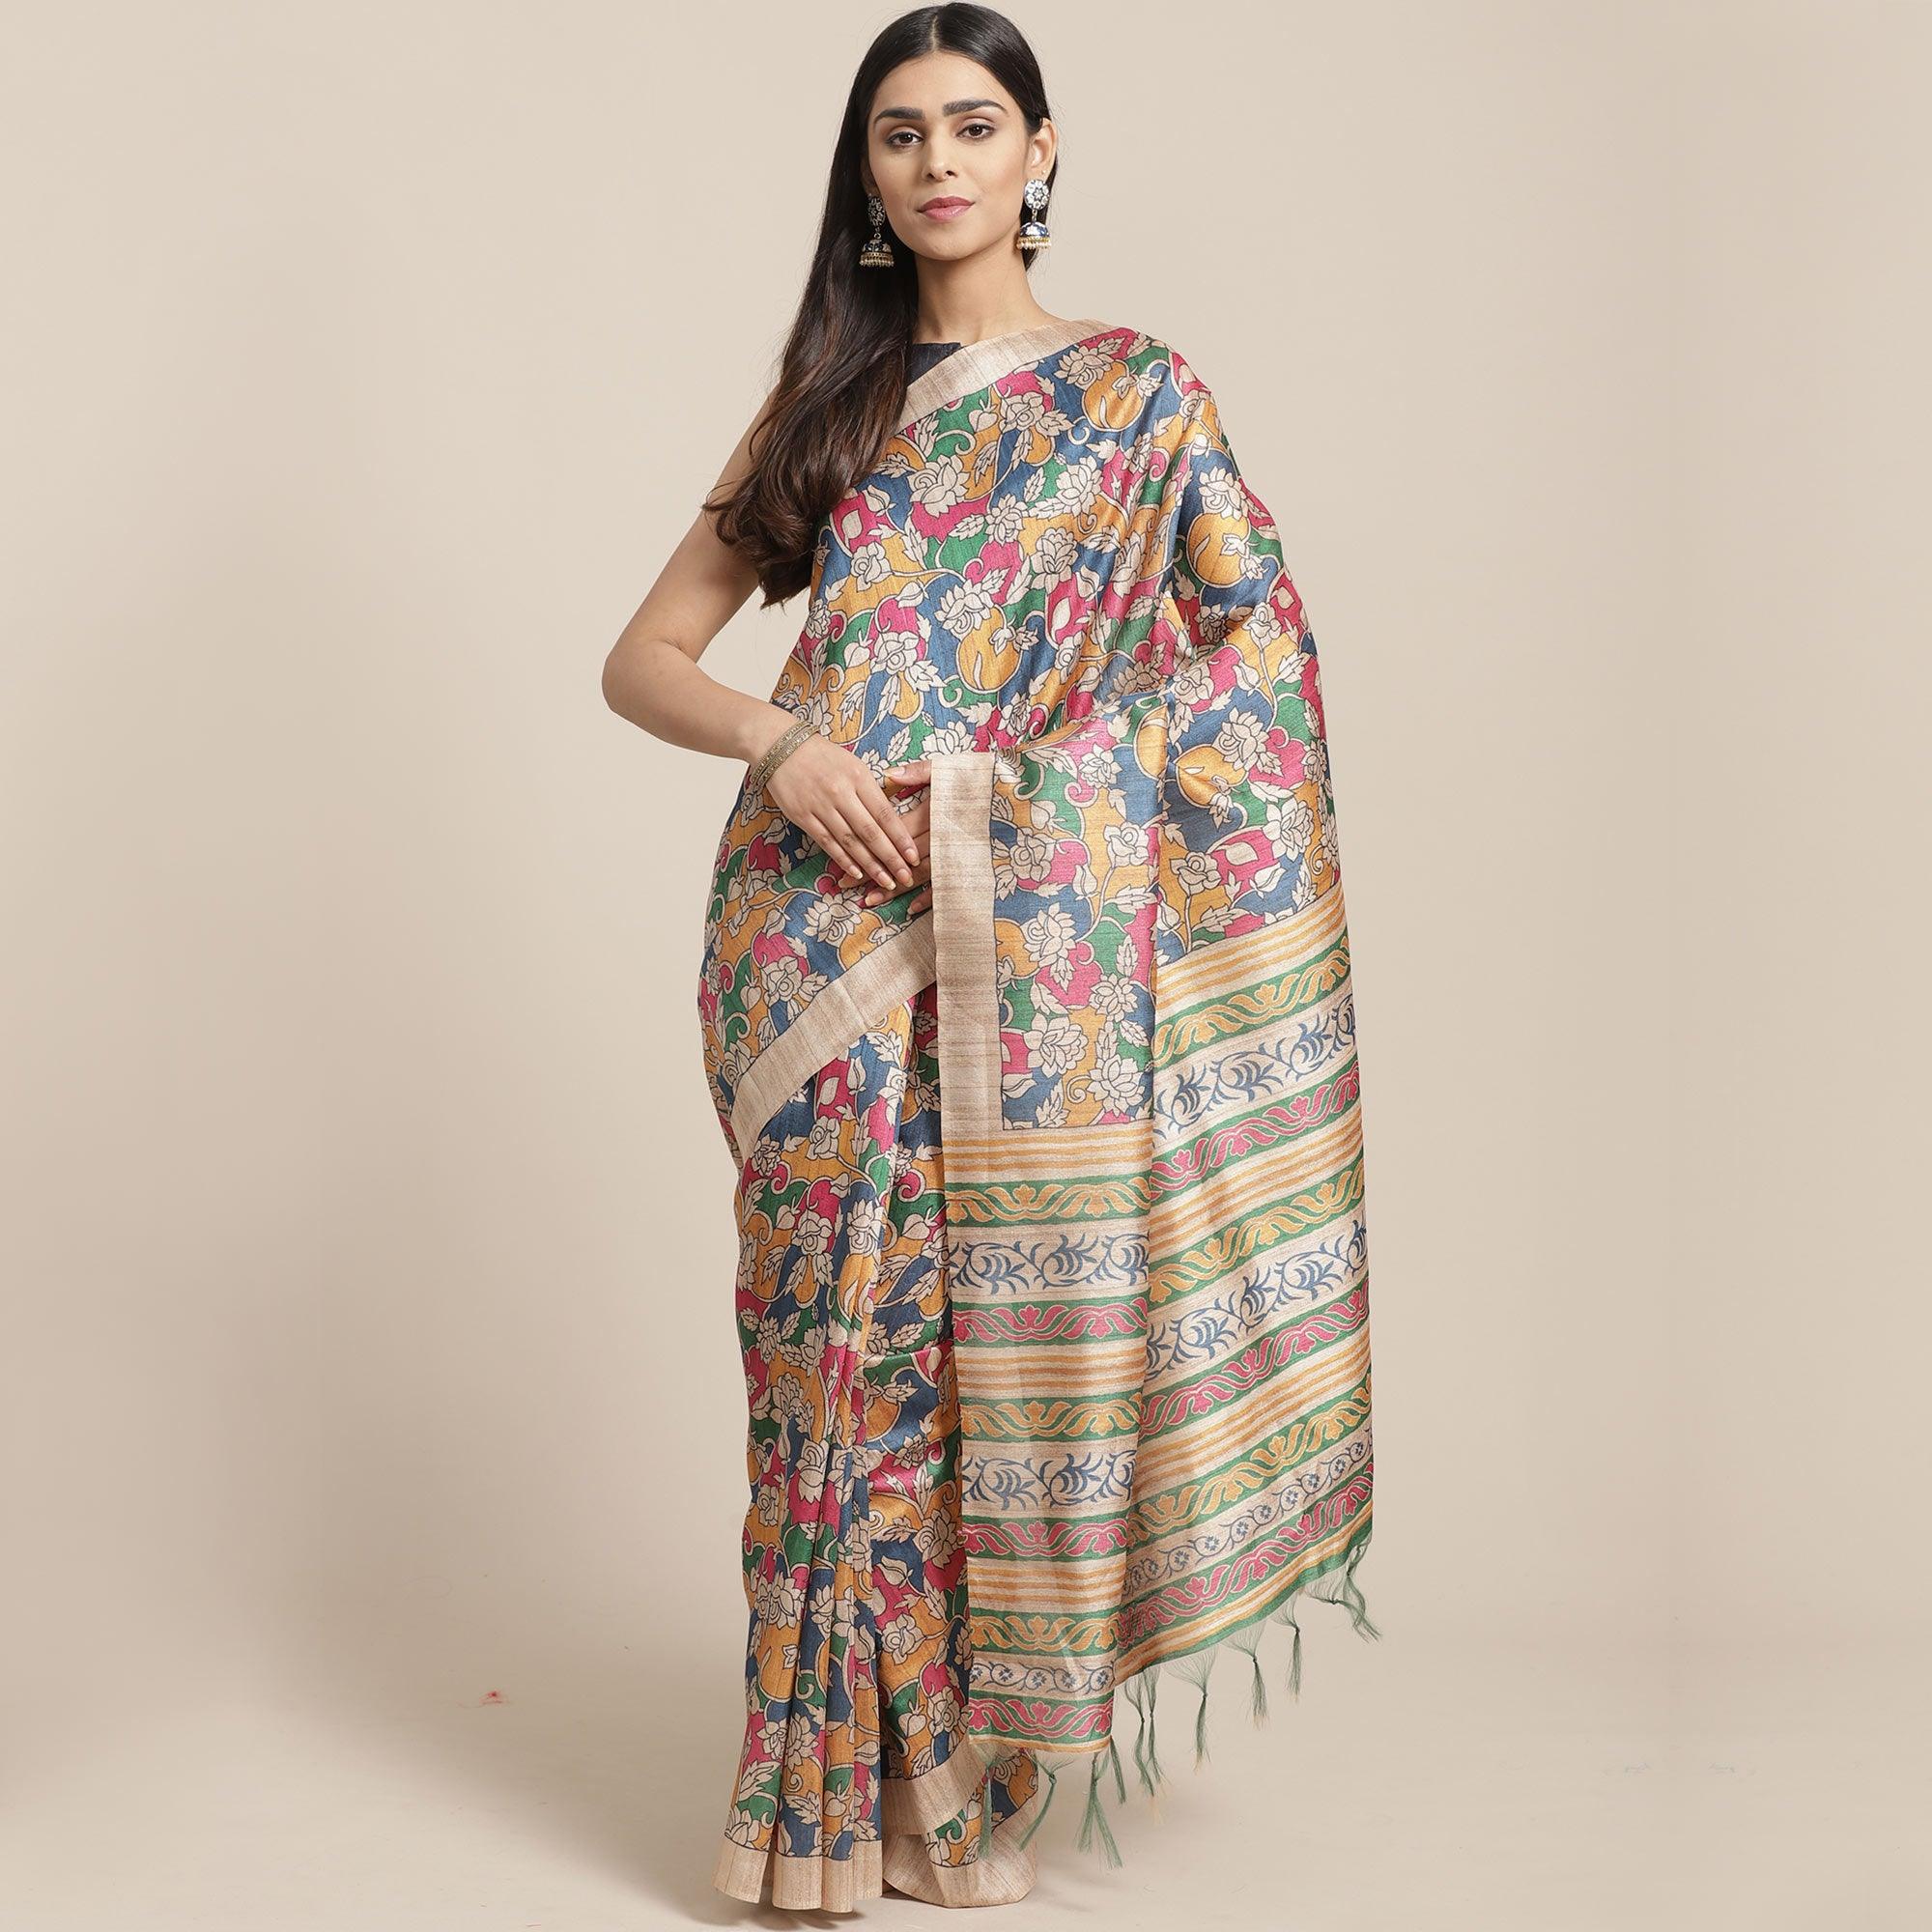 Exceptional Beige-Multi Colored Casual Wear Floral Printed Silk Blend Saree With Tassels - Peachmode